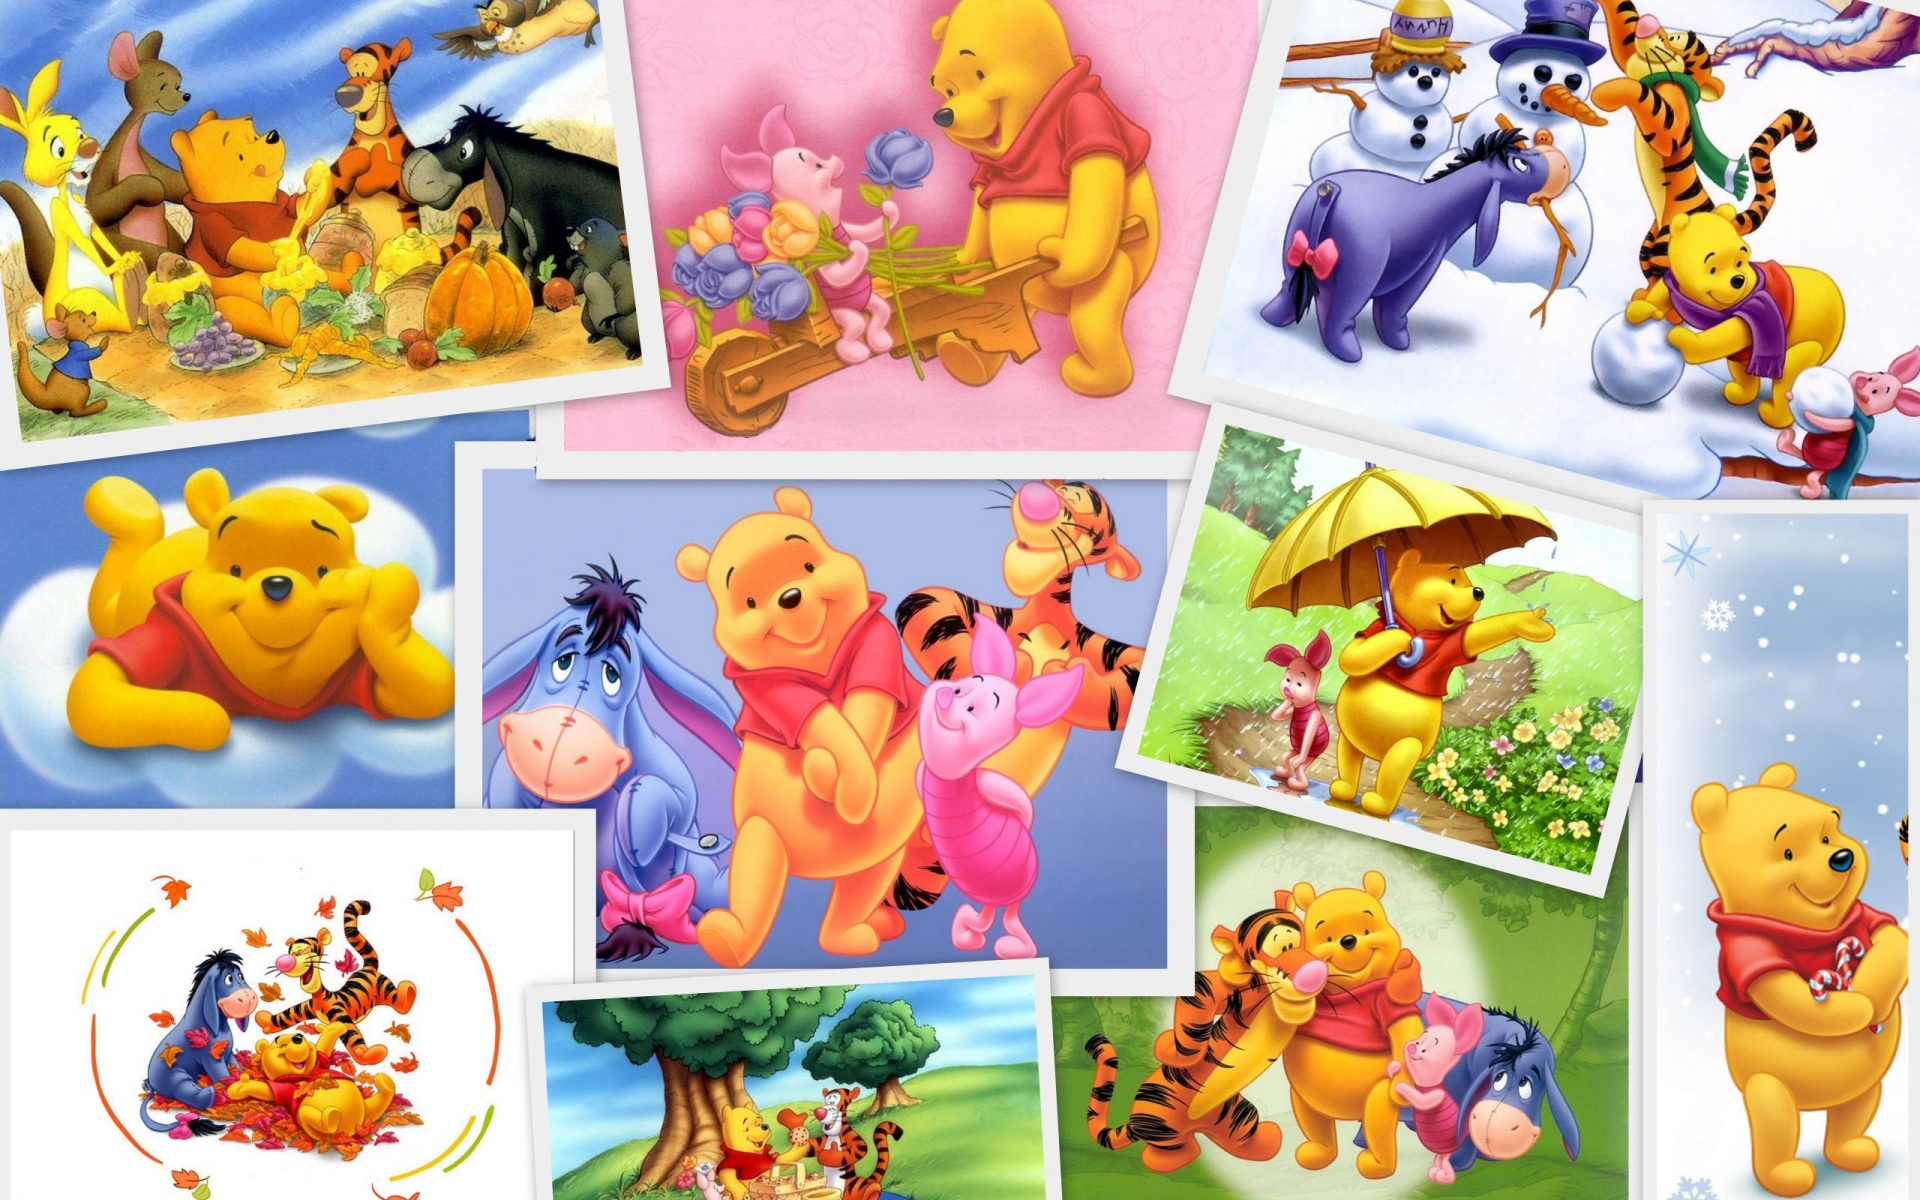 1920x1200 Roo (Winnie the Pooh) HD Wallpapers and Backgrounds